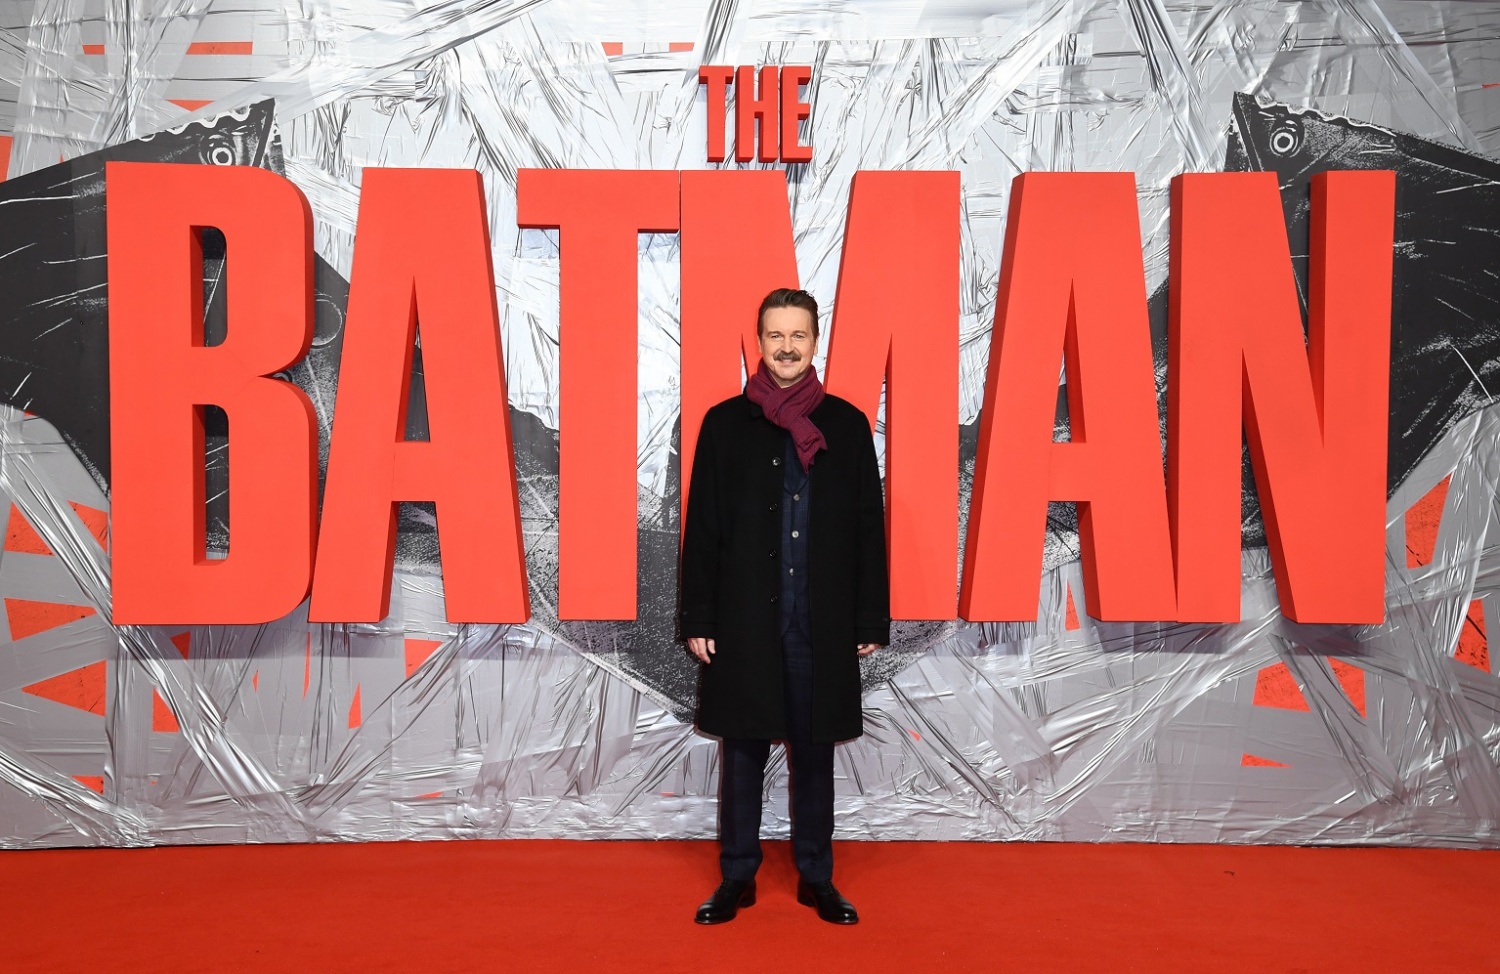 Director Matt Reeves attends "The Batman" special screening at BFI IMAX Waterloo on February 23, 2022 in London, England. (Photo by Gareth Cattermole/Getty Images for Warner Bros.)